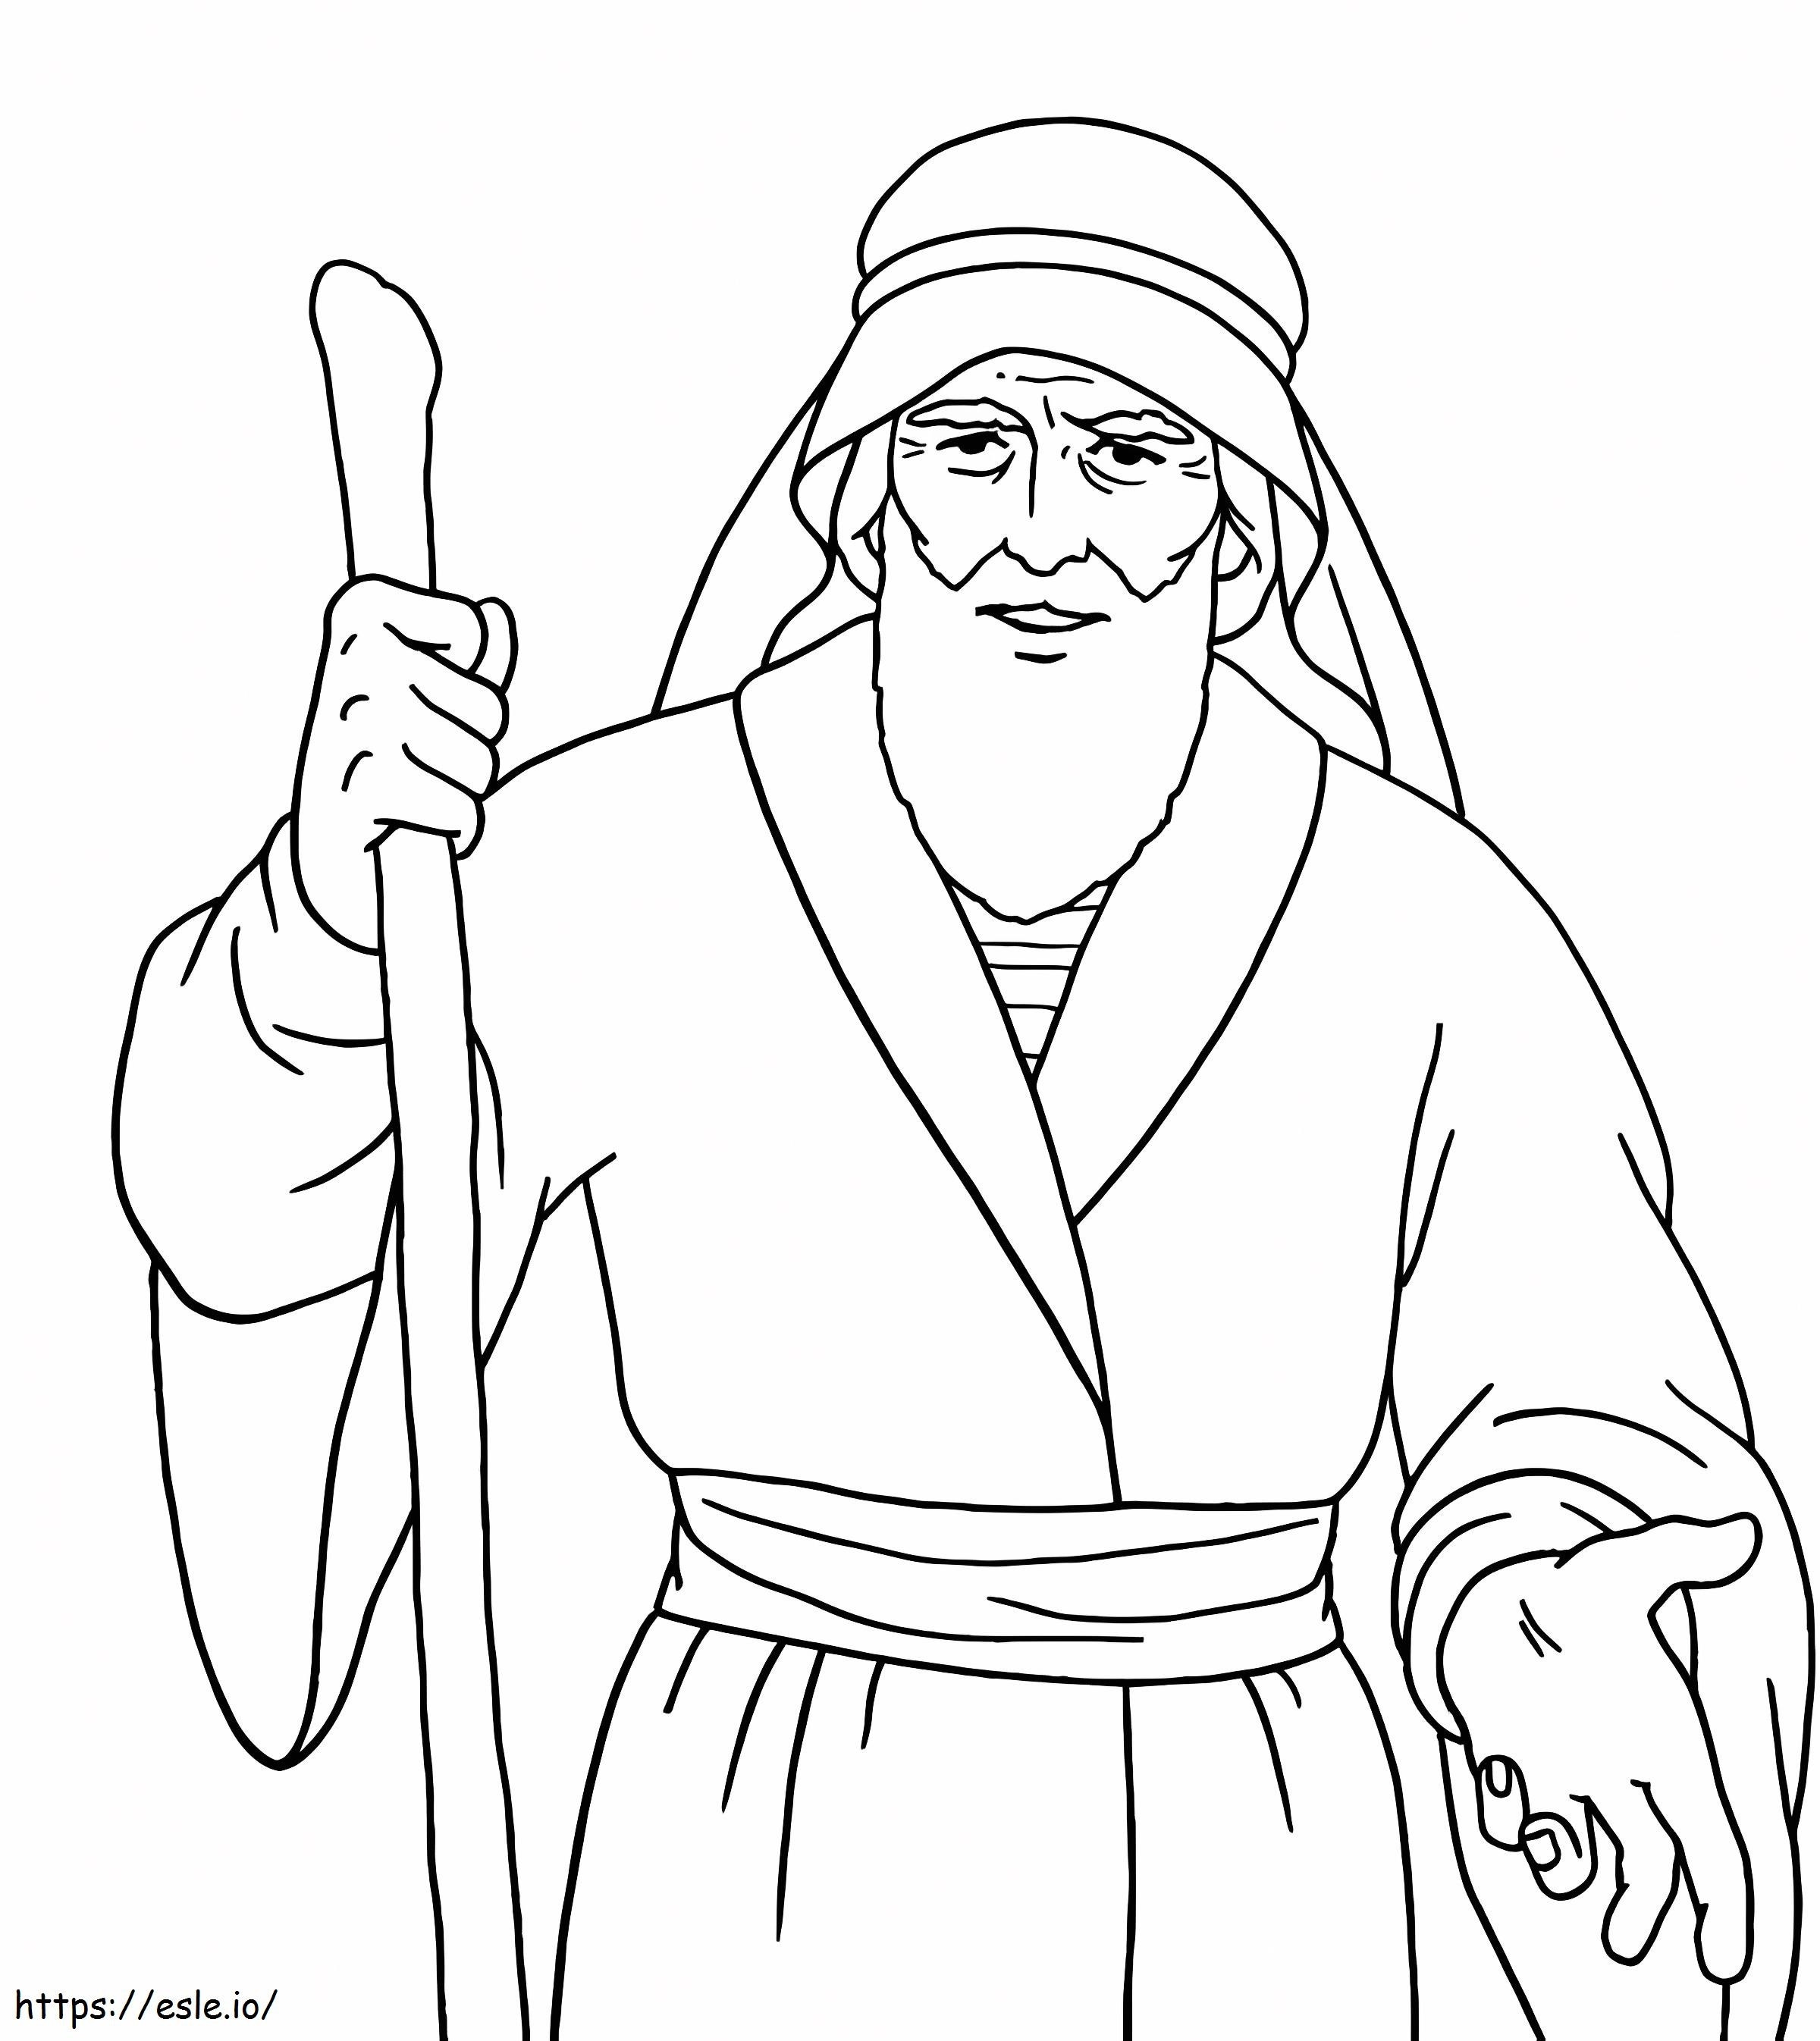 Impressive Drawing Of Moses For Coloring coloring page